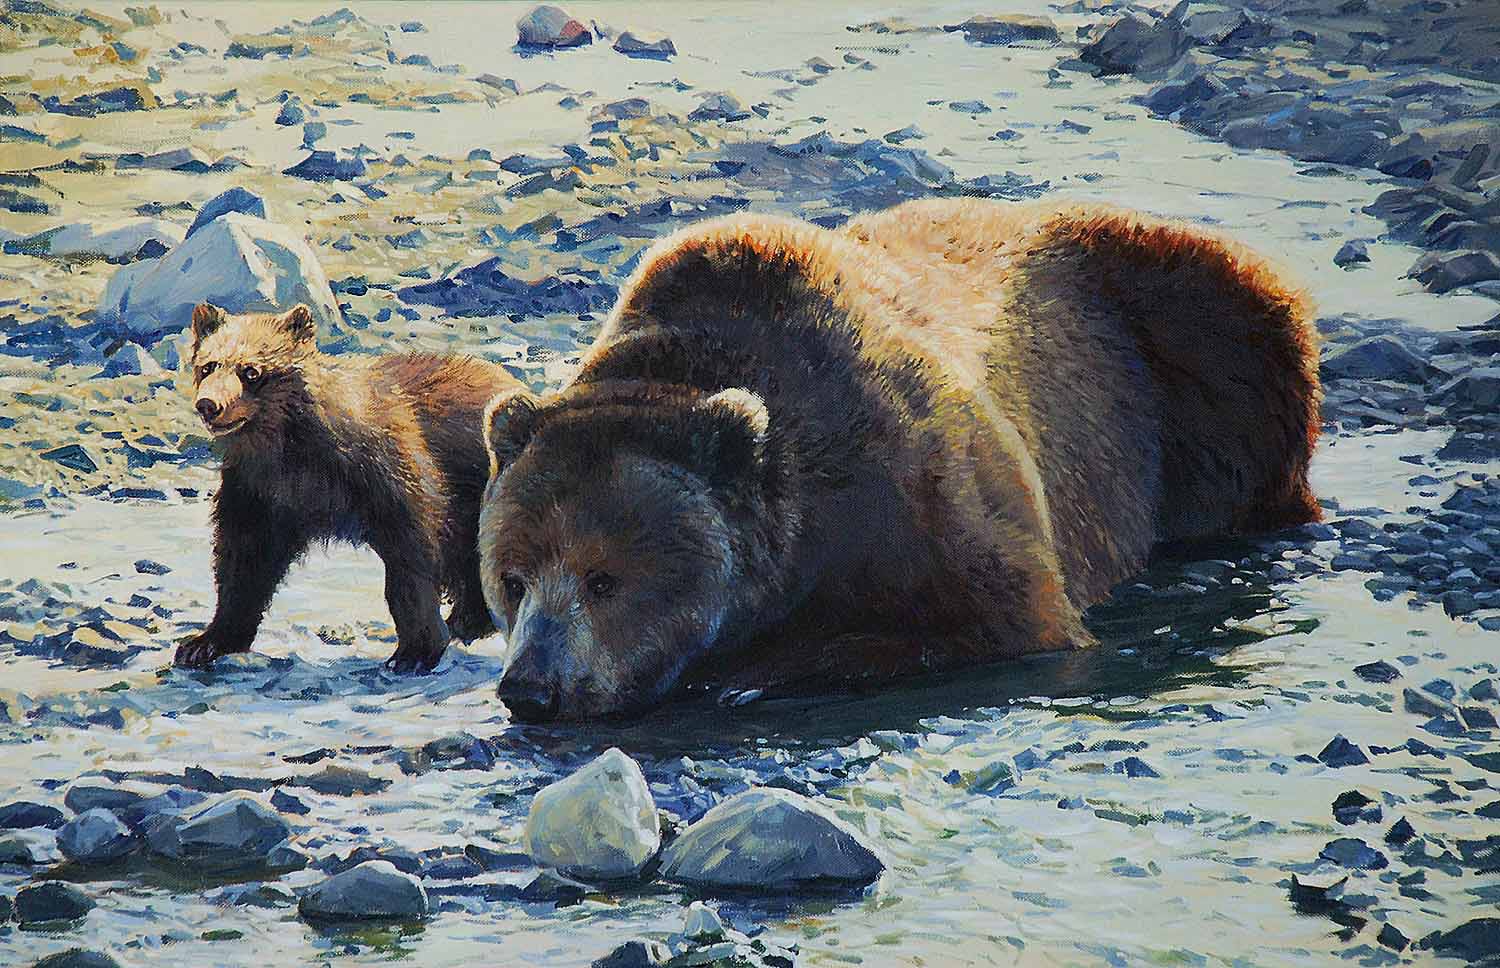 DP2 – Grizzly and Cub © Dino Paravano